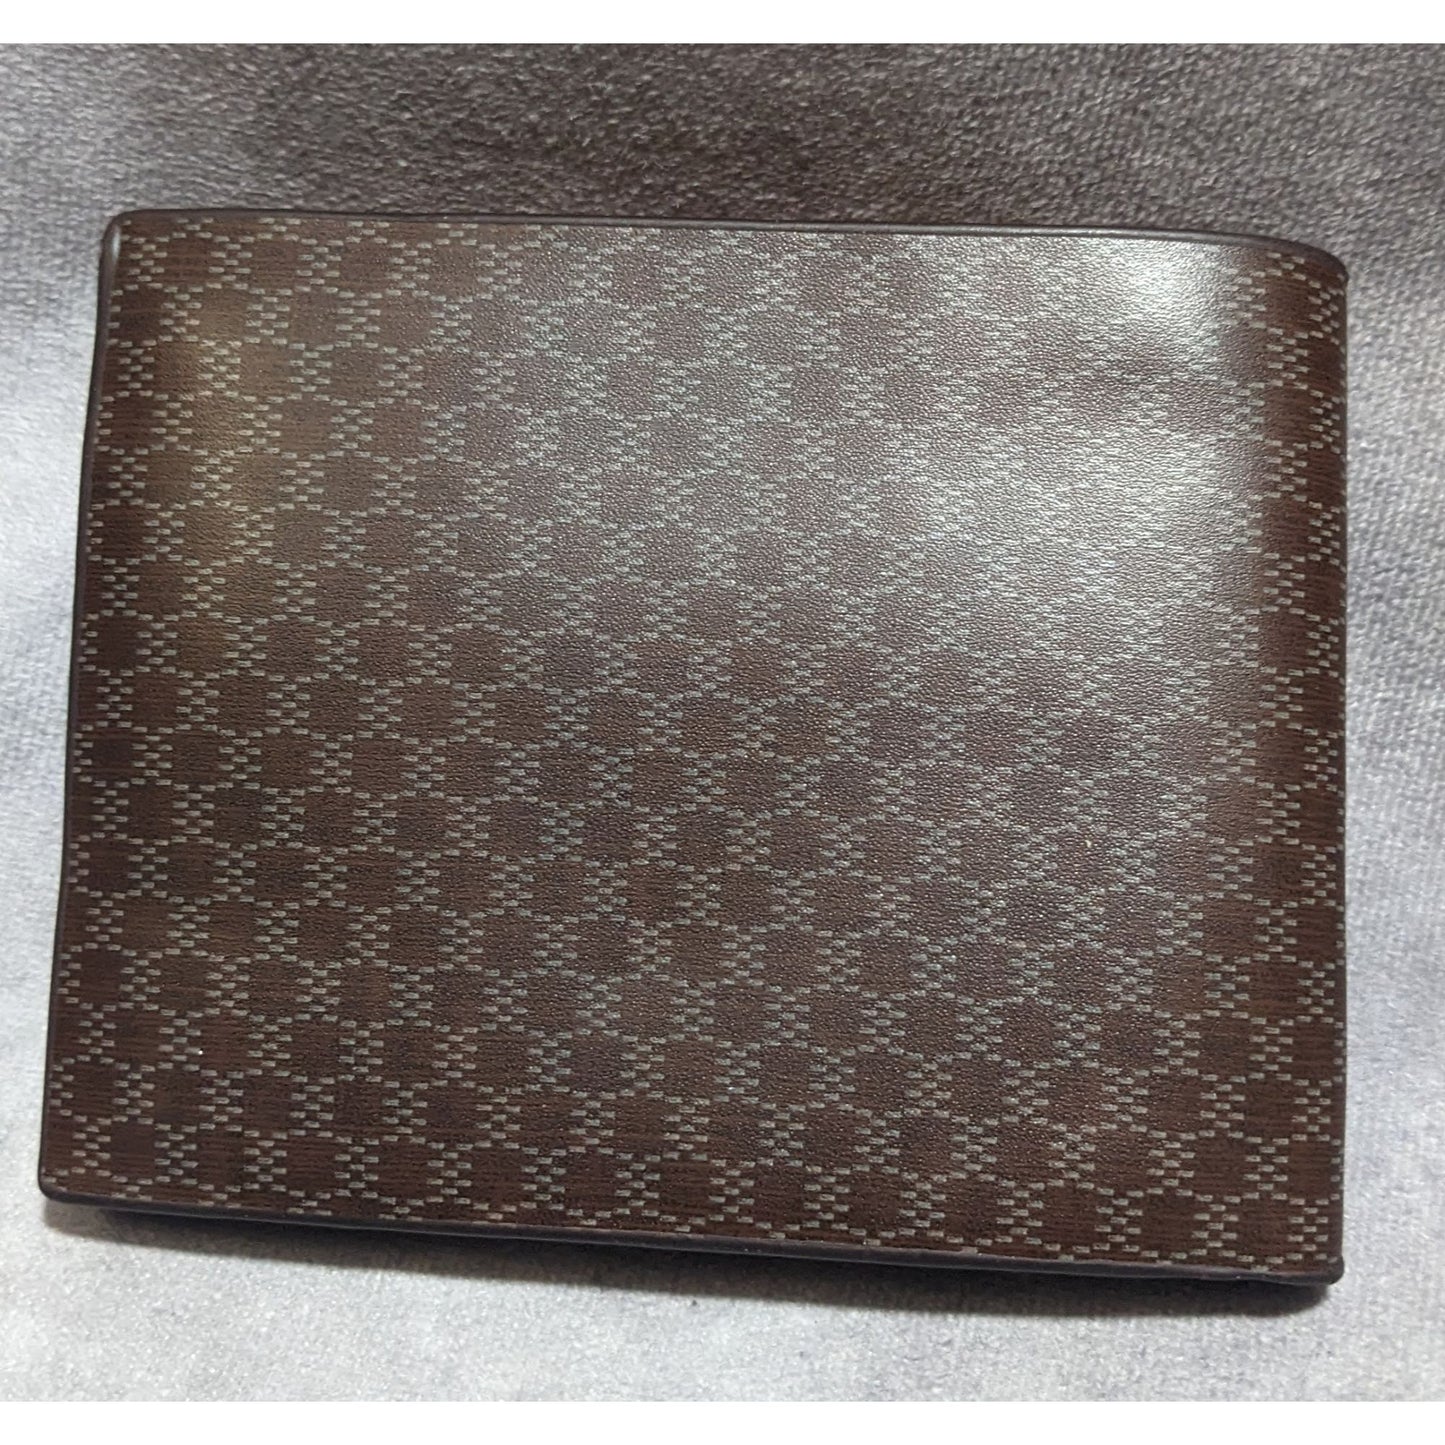 Pidengbao Genuine Leather Wallet